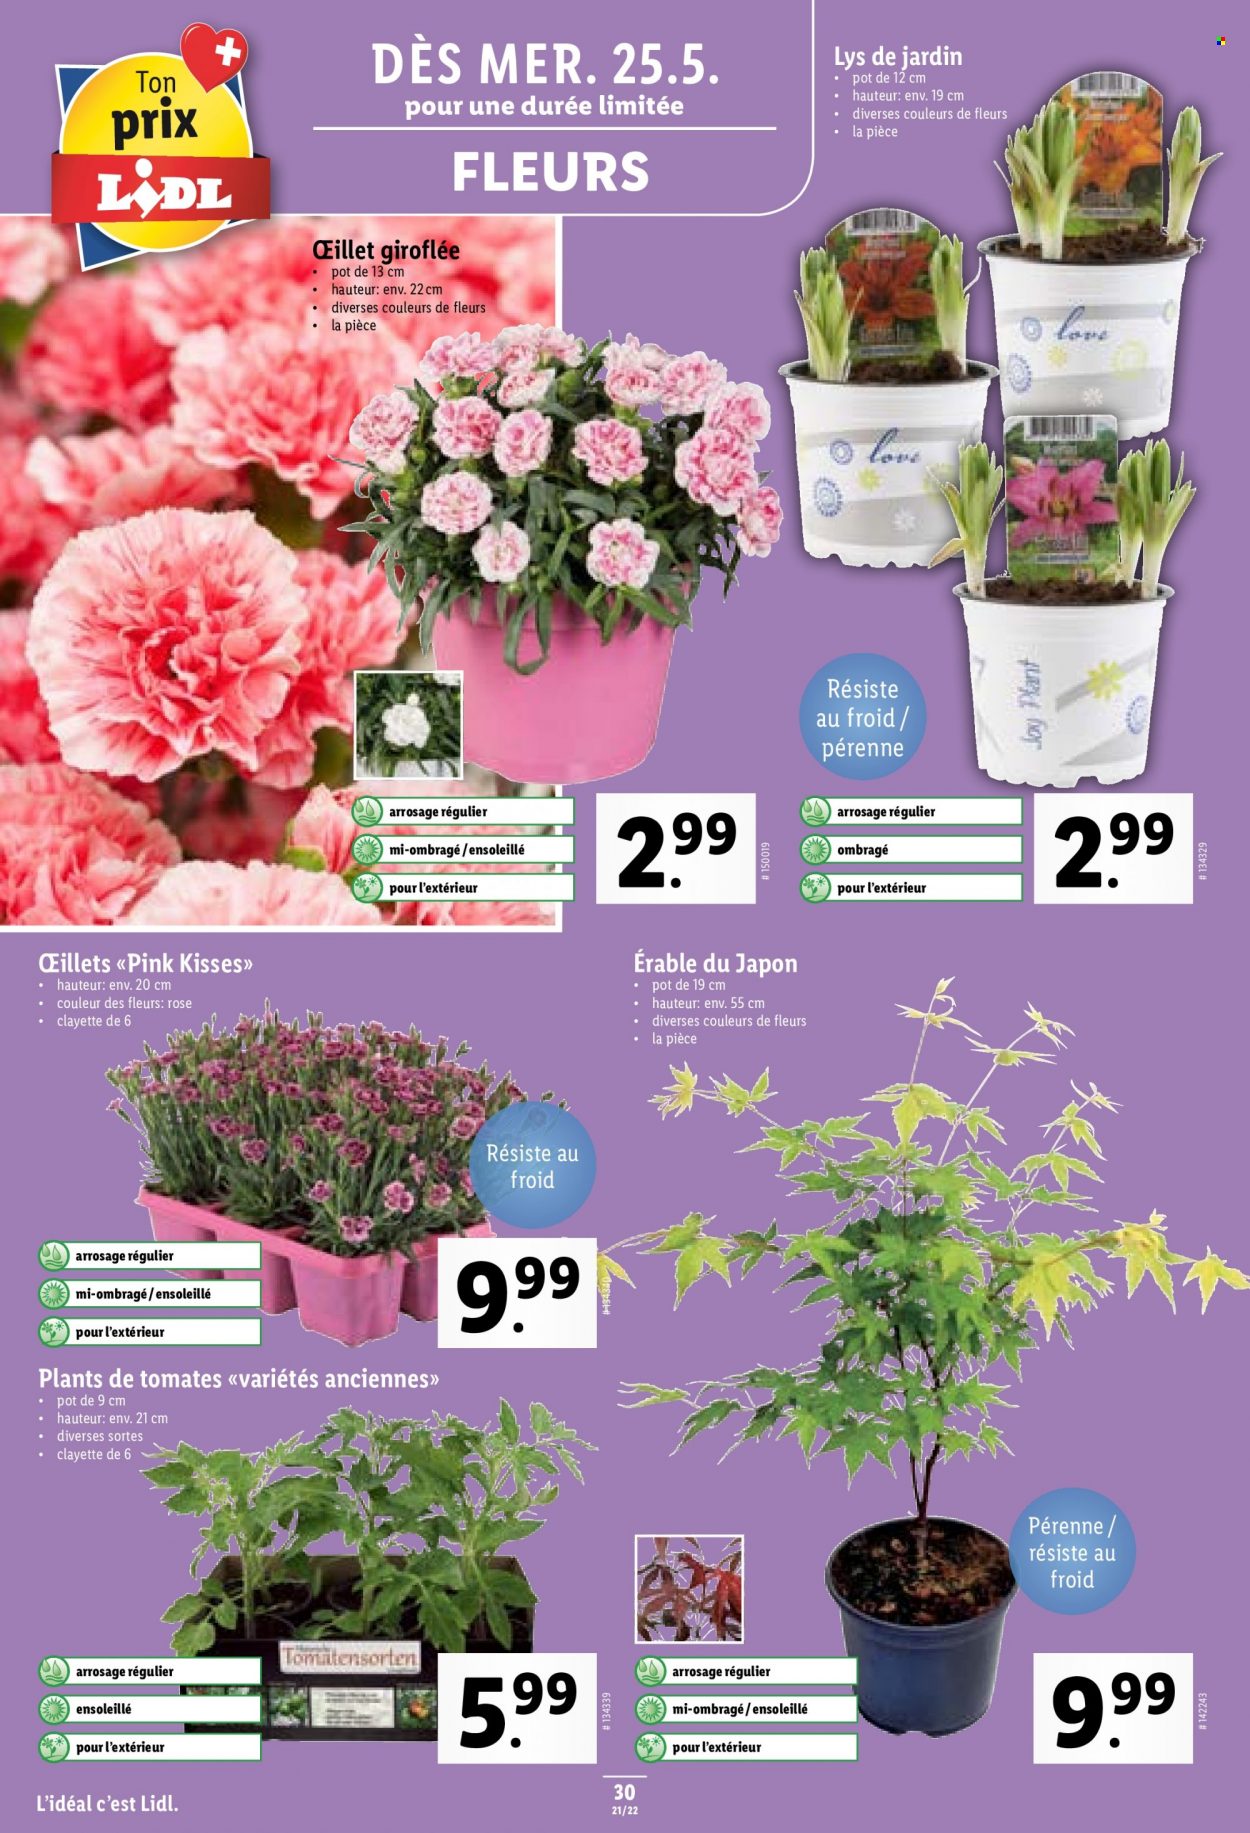 Catalogue Lidl - 25.5.2022 - 1.6.2022. Page 30.